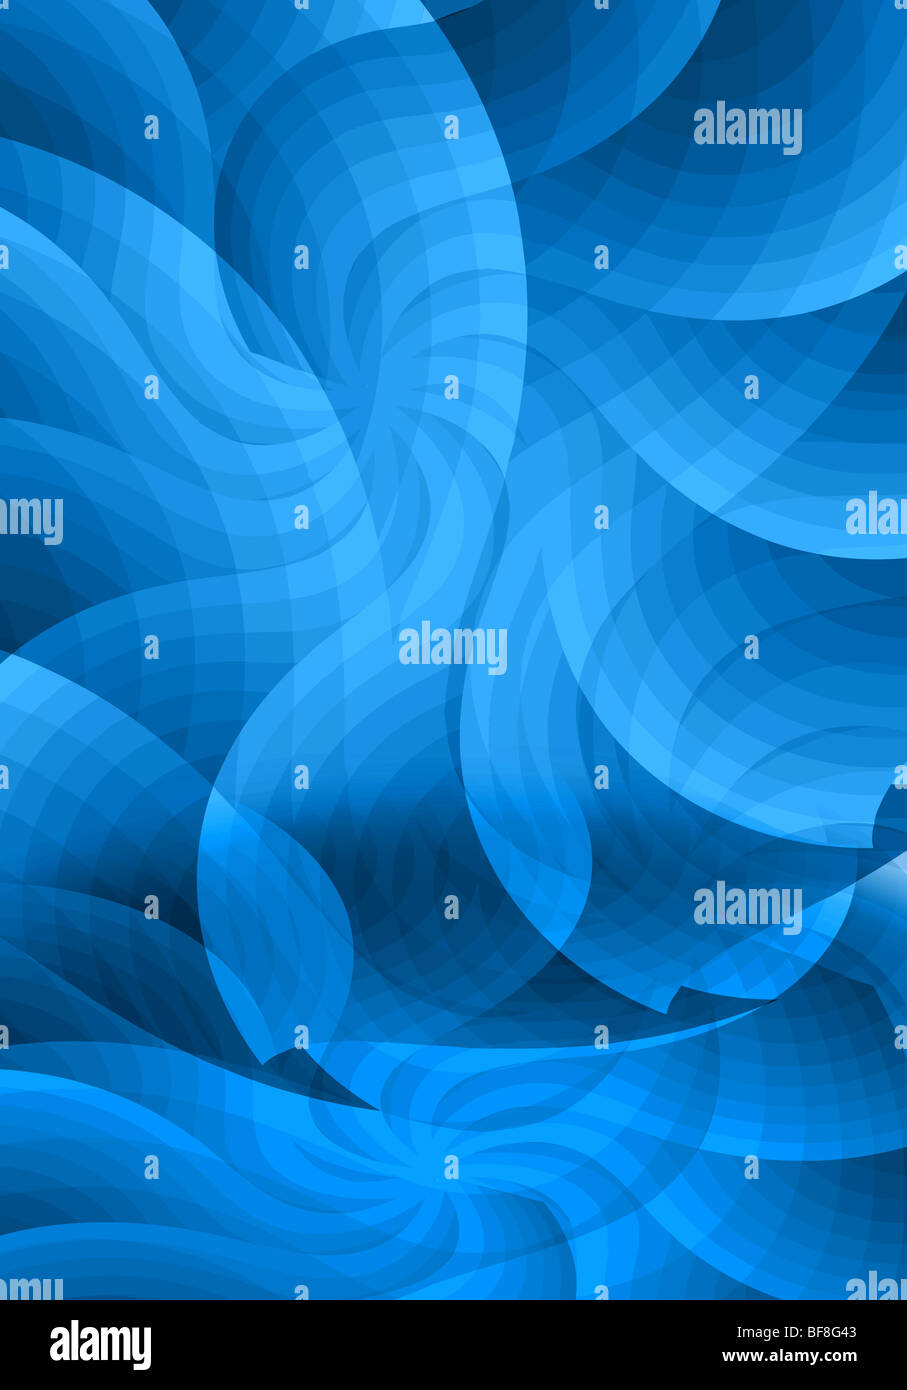 Abstract background with swirls and geometric patterns Stock Photo